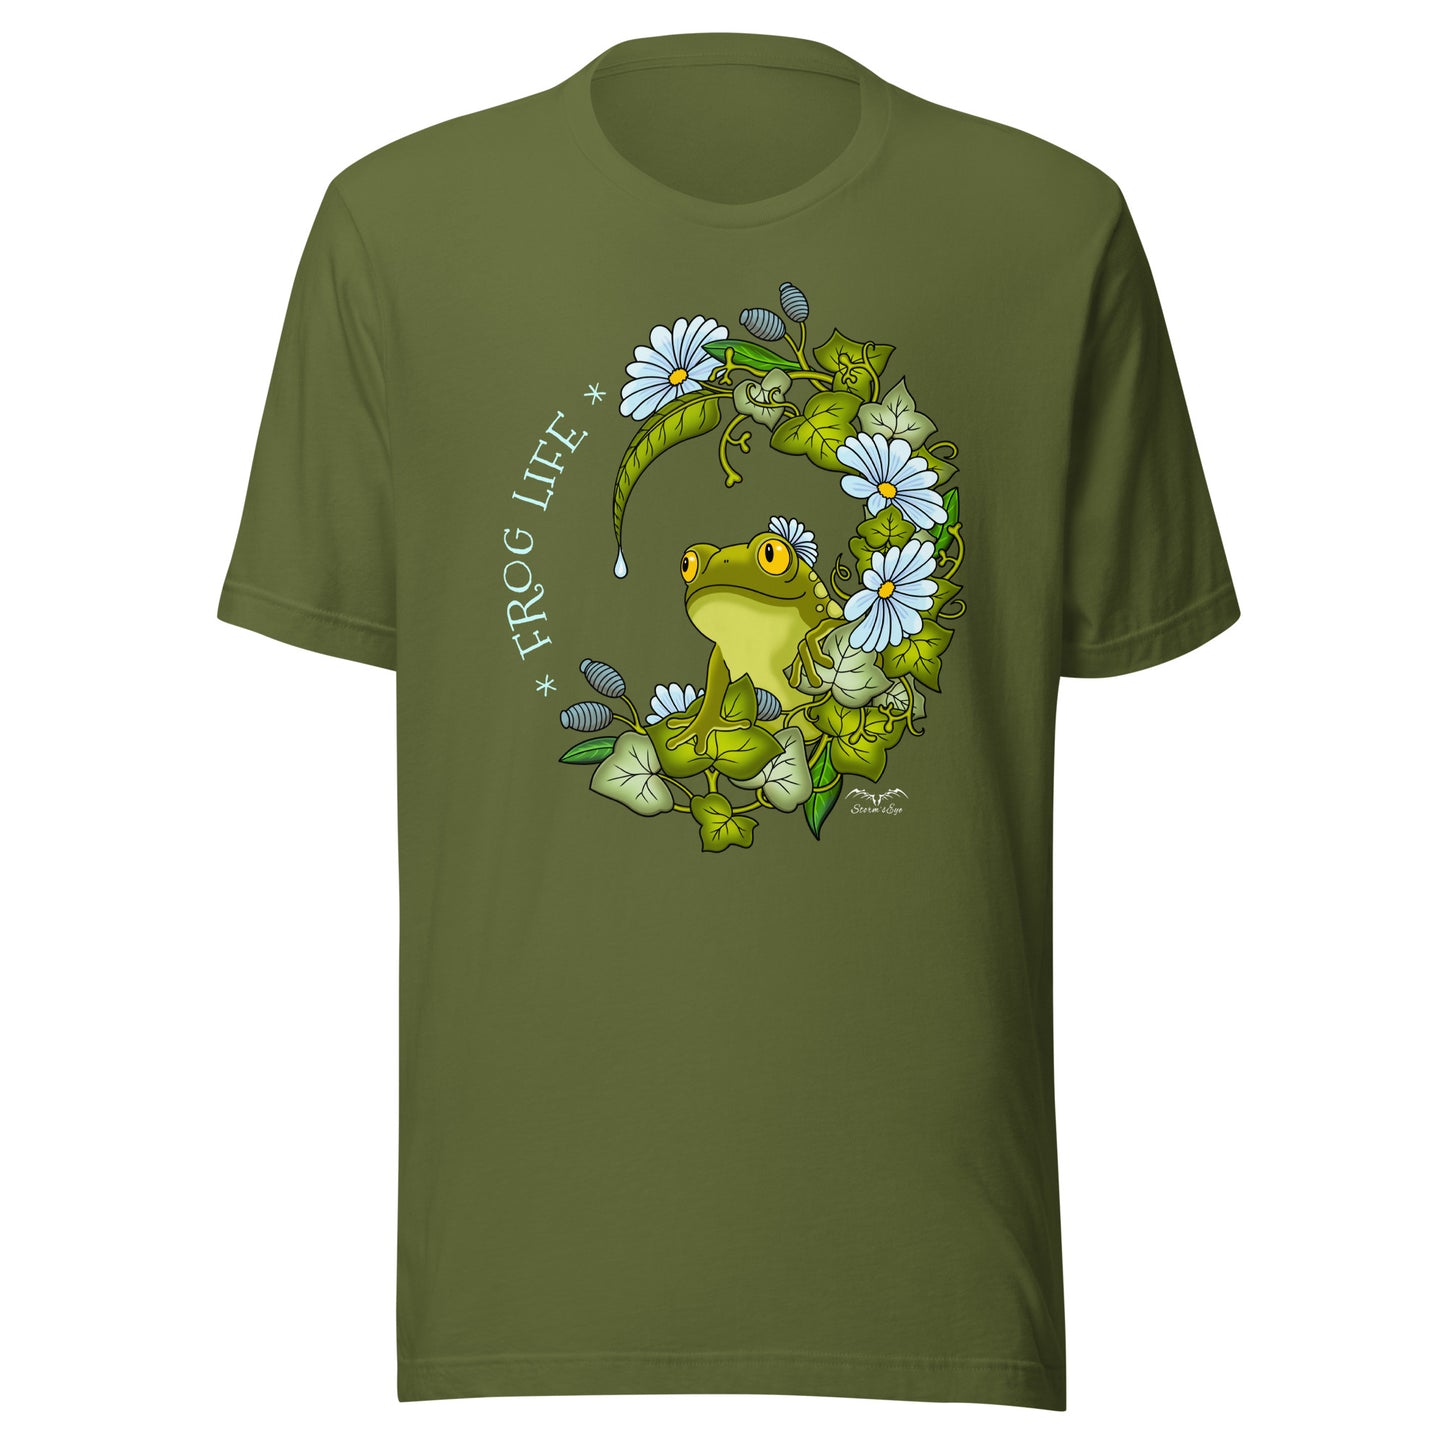 stormseye design frog life T shirt, flat view olive green